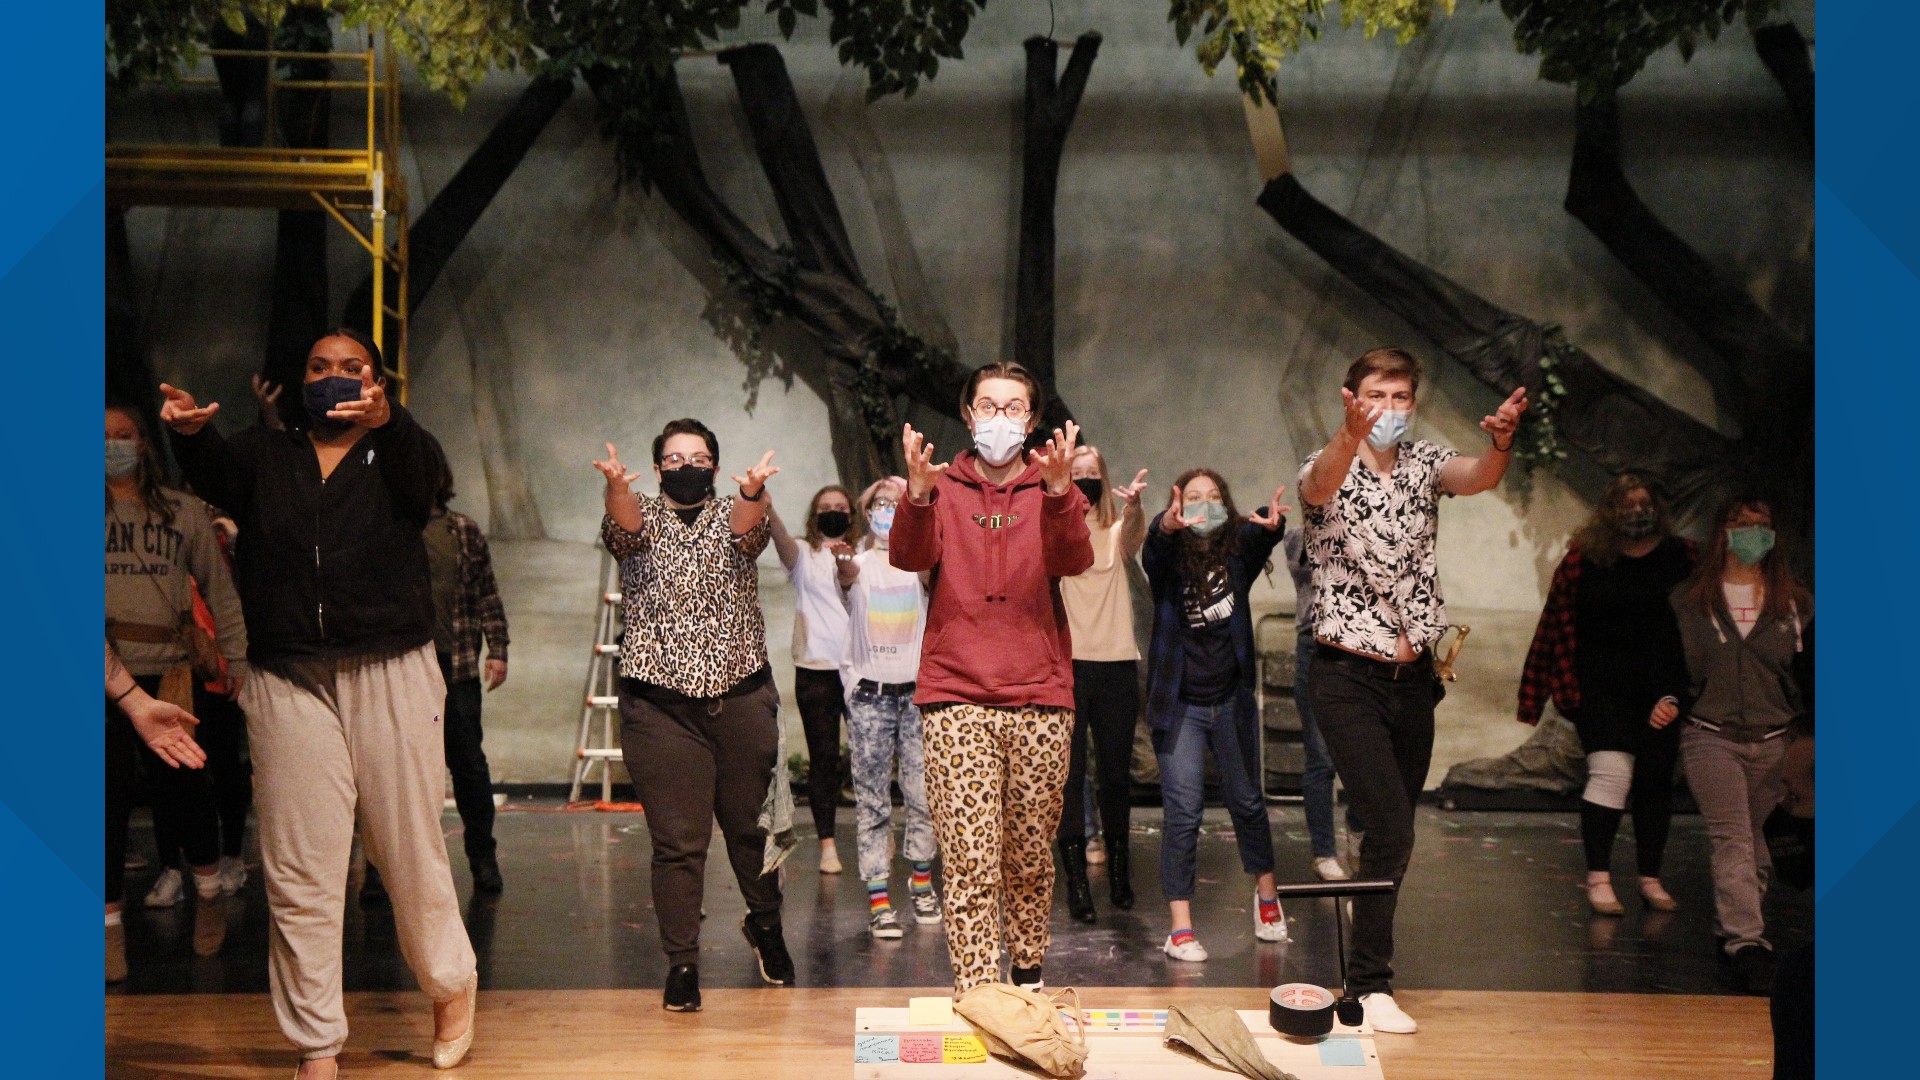 The high school's show was postponed last spring due to the COVID-19 pandemic, but students will be able to perform starting March 18.